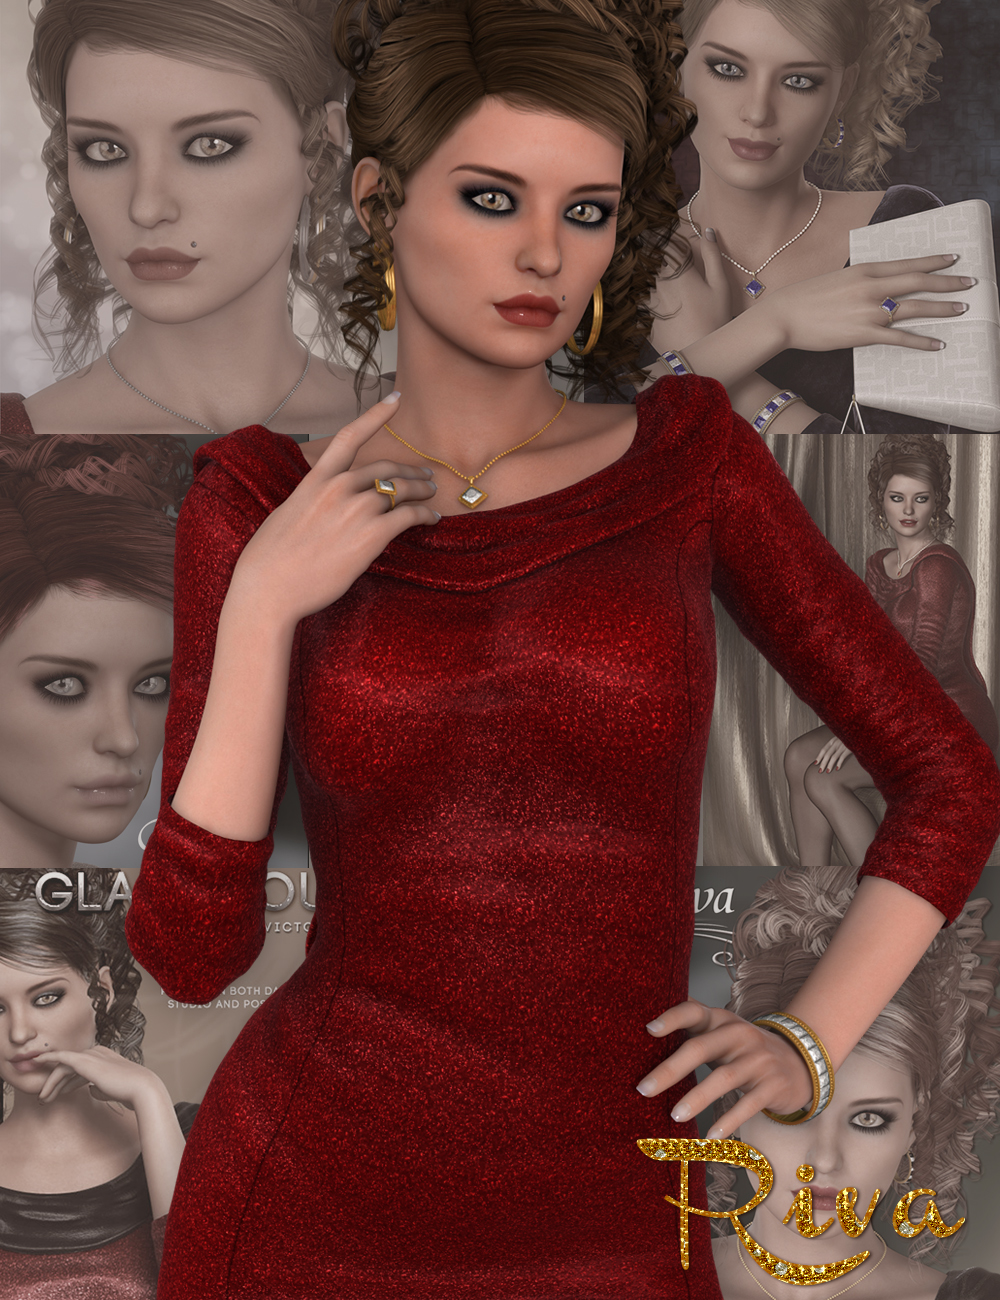 Glamorous Riva - Character, Hair, Outfit, Accessories and Poses Bundle by: SWAMSabbyFred Winkler ArtFisty & Darcironman13, 3D Models by Daz 3D